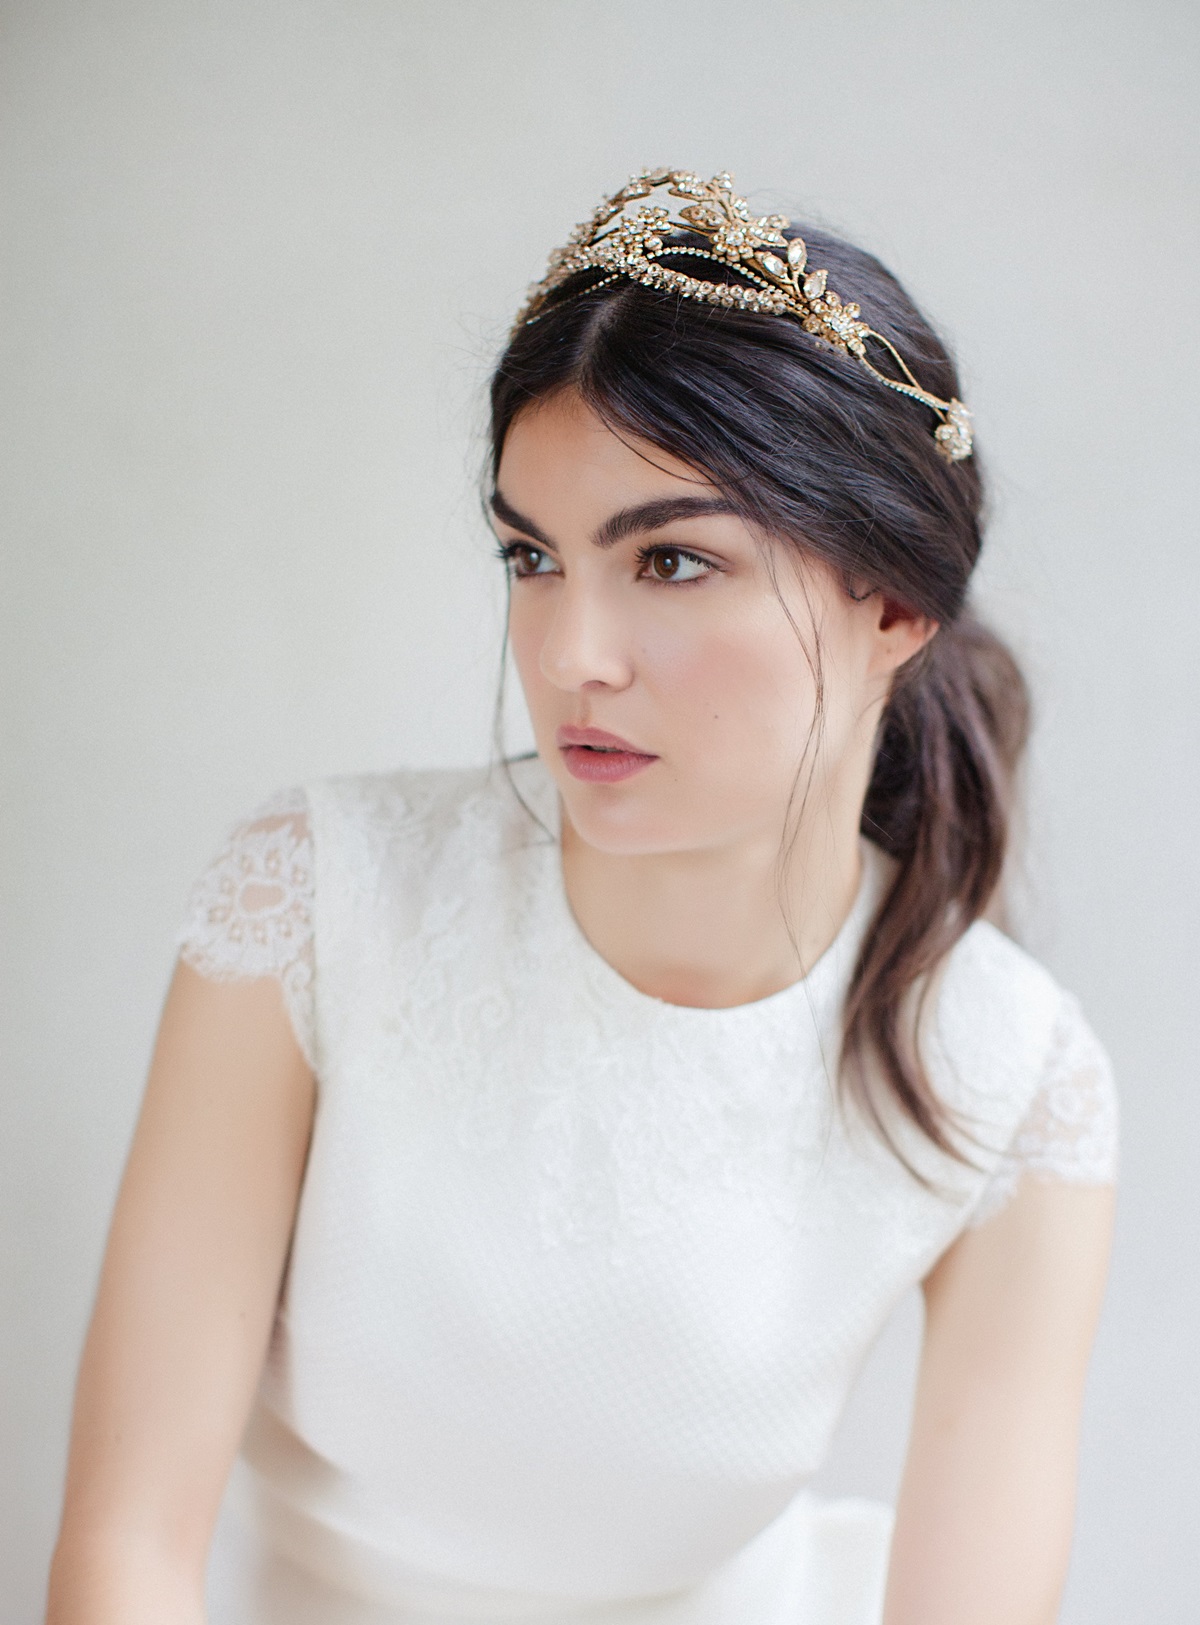 Jannie Baltzer Copenhagen - A 2017 collection of delicate, nature inspired couture bridal headpieces.